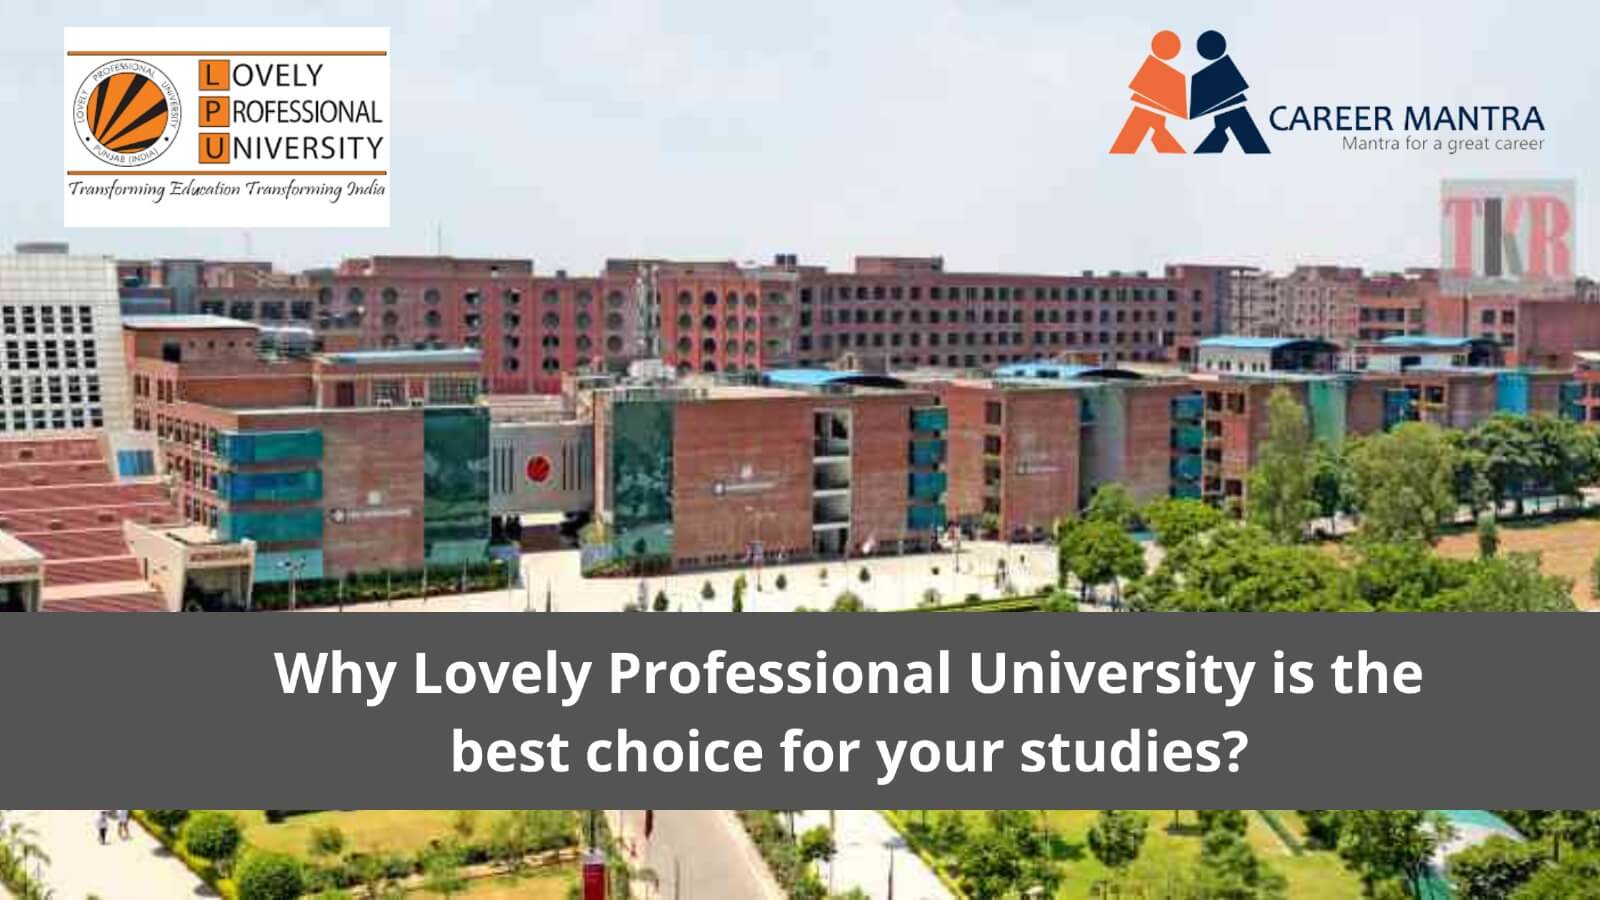 https://www.careermantra.net/blog/why-lovely-professional-university-is-the-best-choice-for-your-studies/